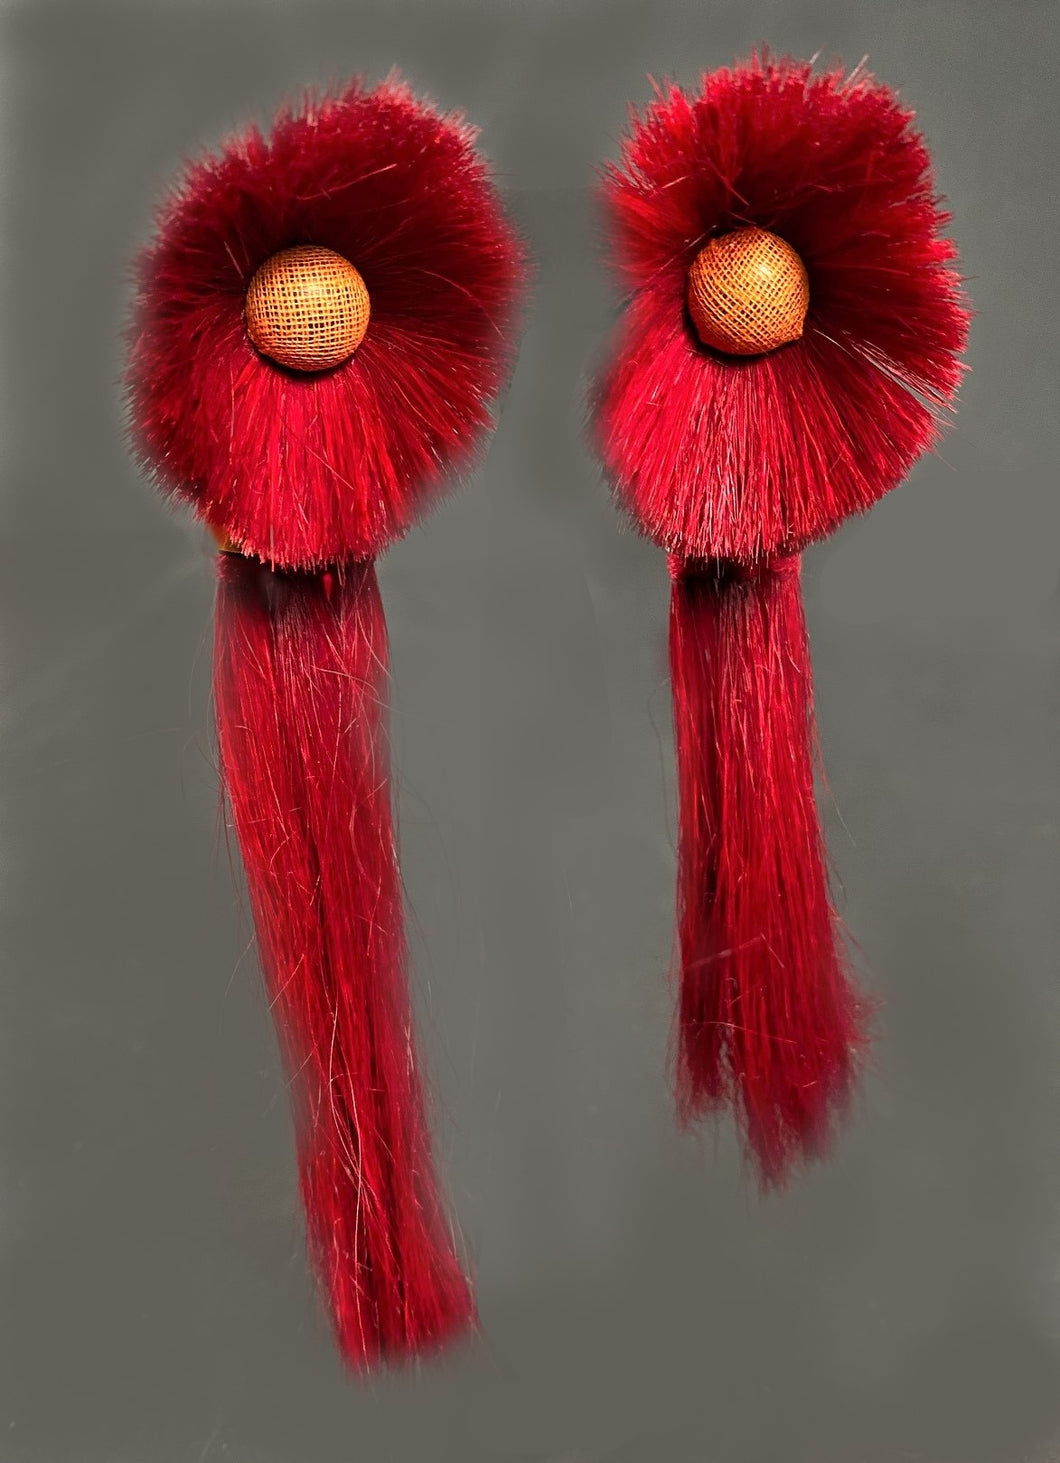 Earrings from Nagaland